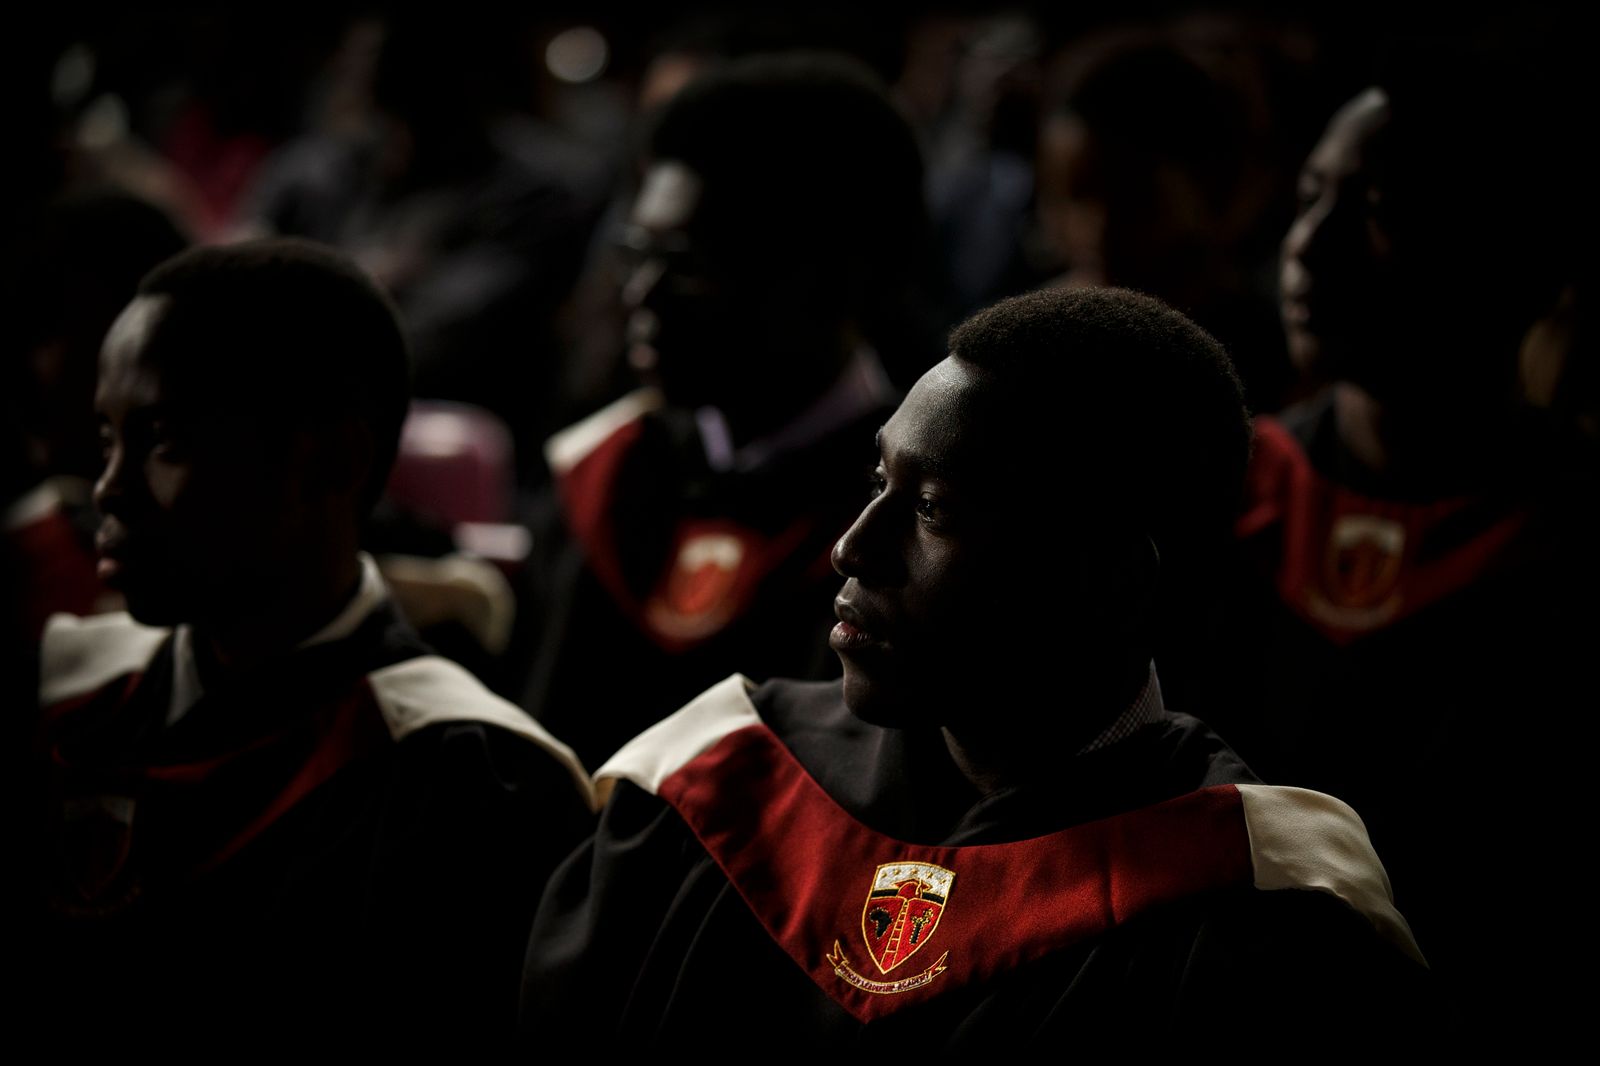 © Ilvy Njiokiktjien - Students of the prestigious African Leadership Academy in the north of Johannesburg, South Africa.